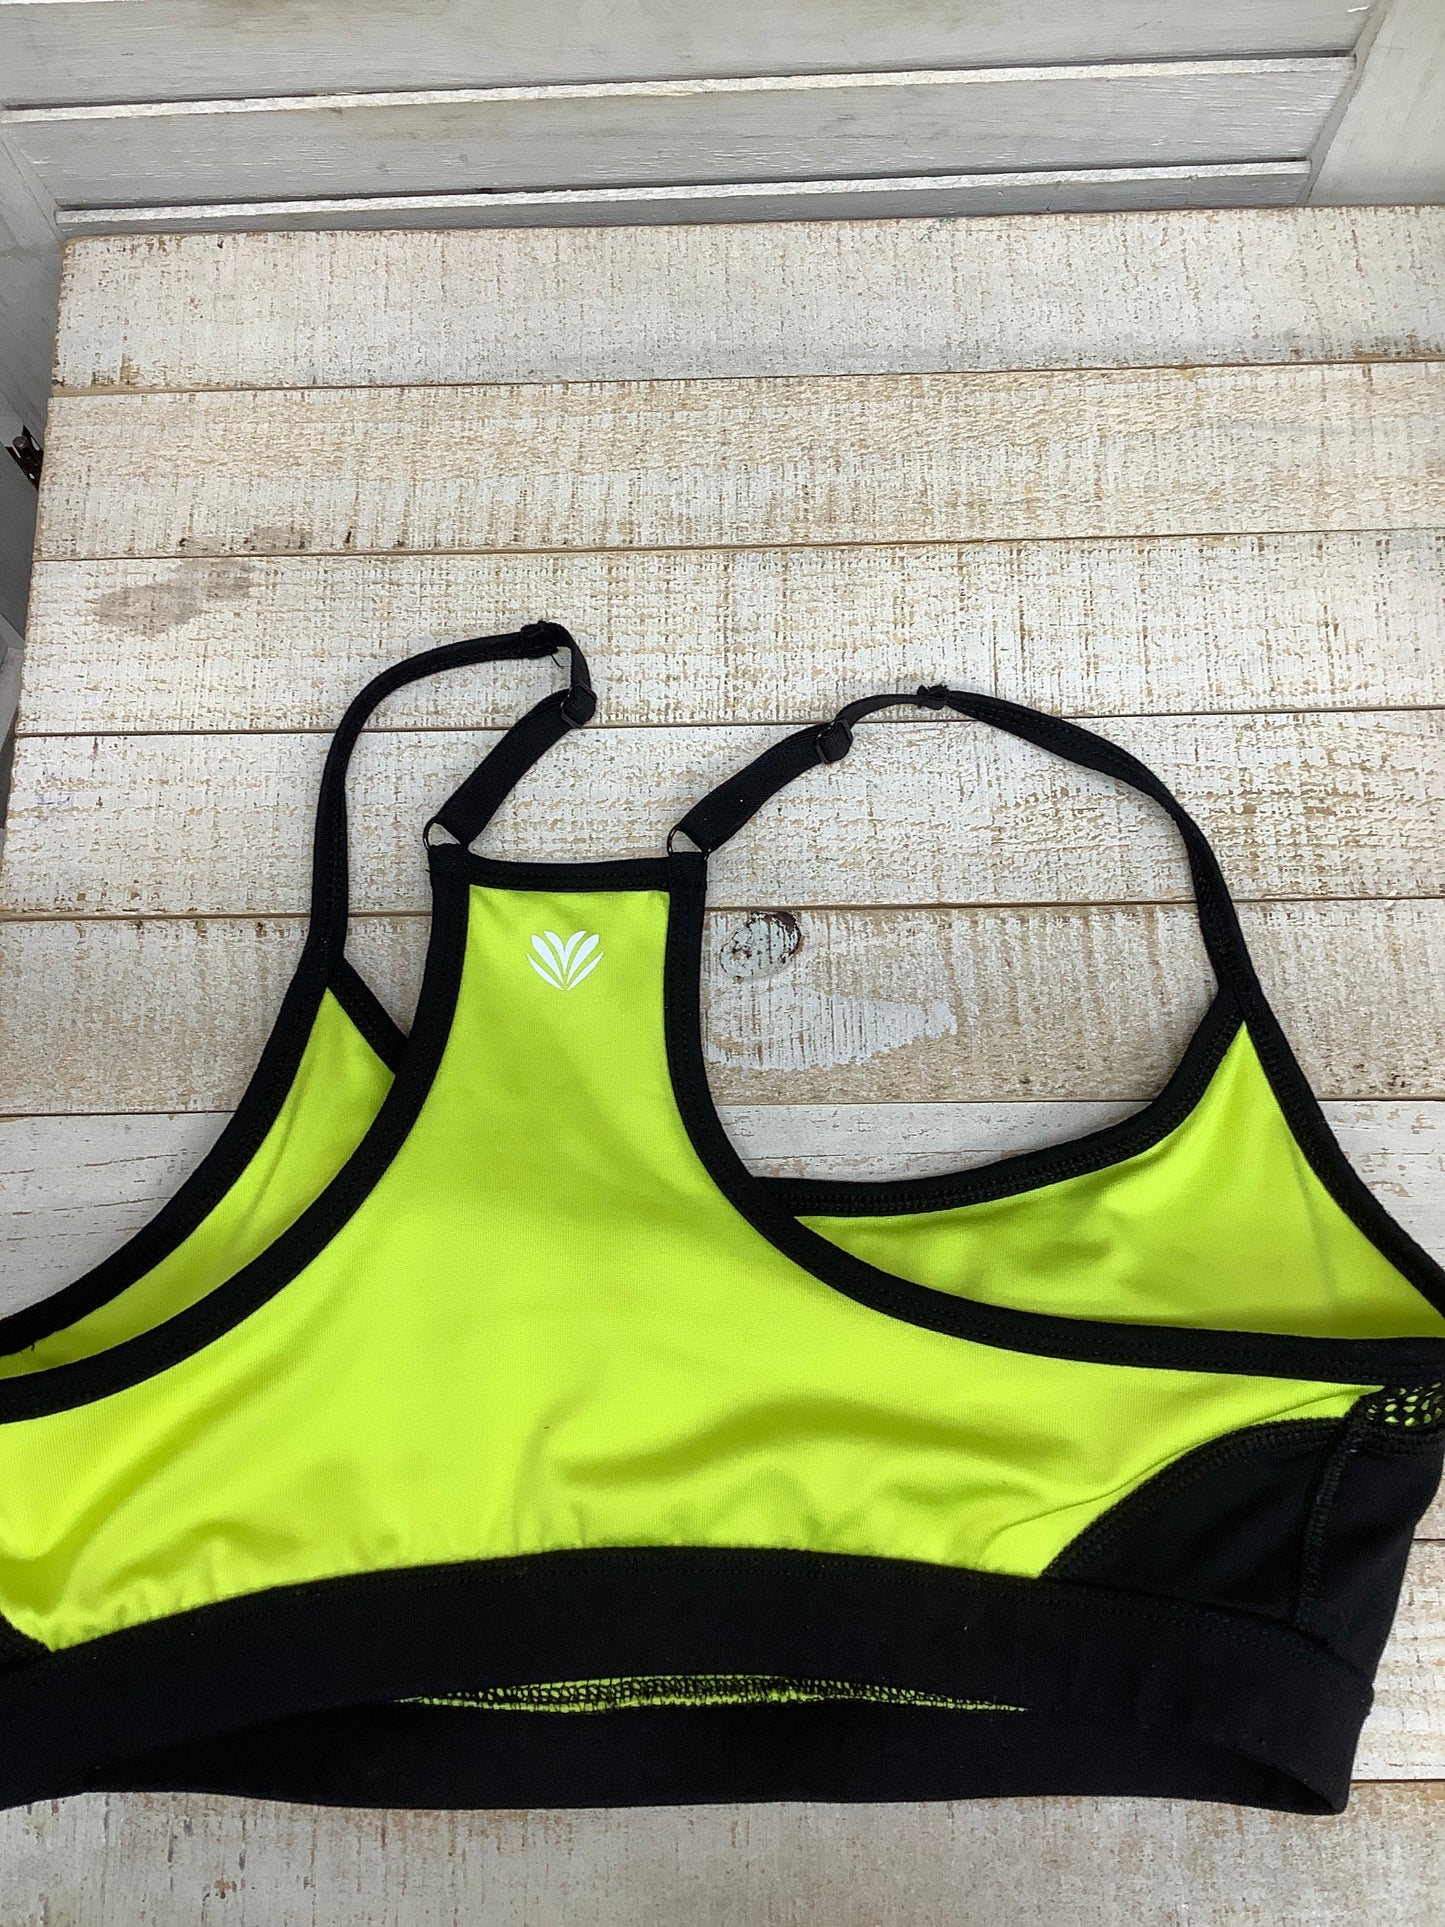 Athletic Bra By Forever 21  Size: M